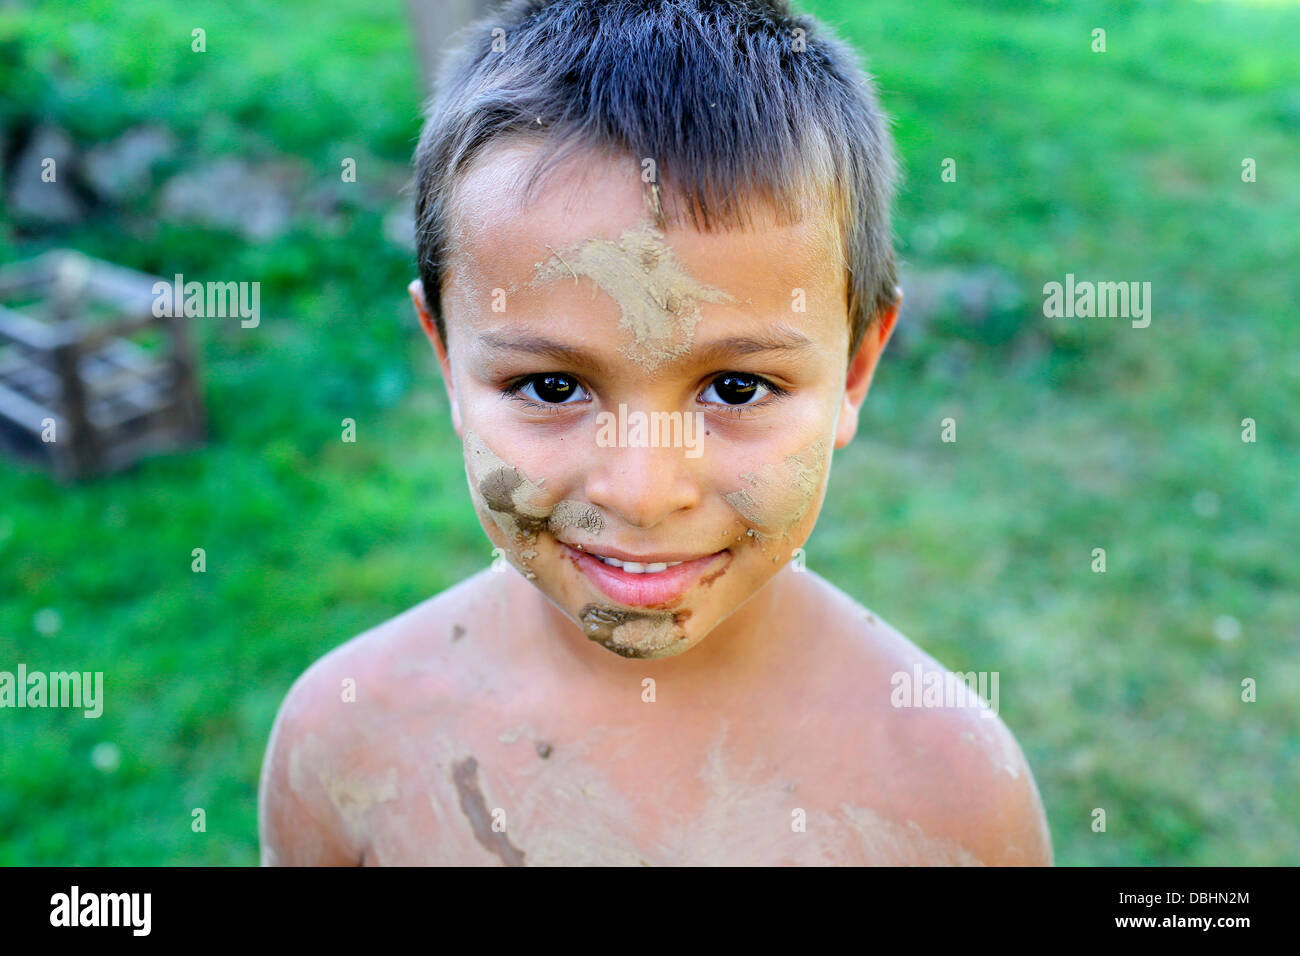 Boy with a dirty face Stock Photo - Alamy